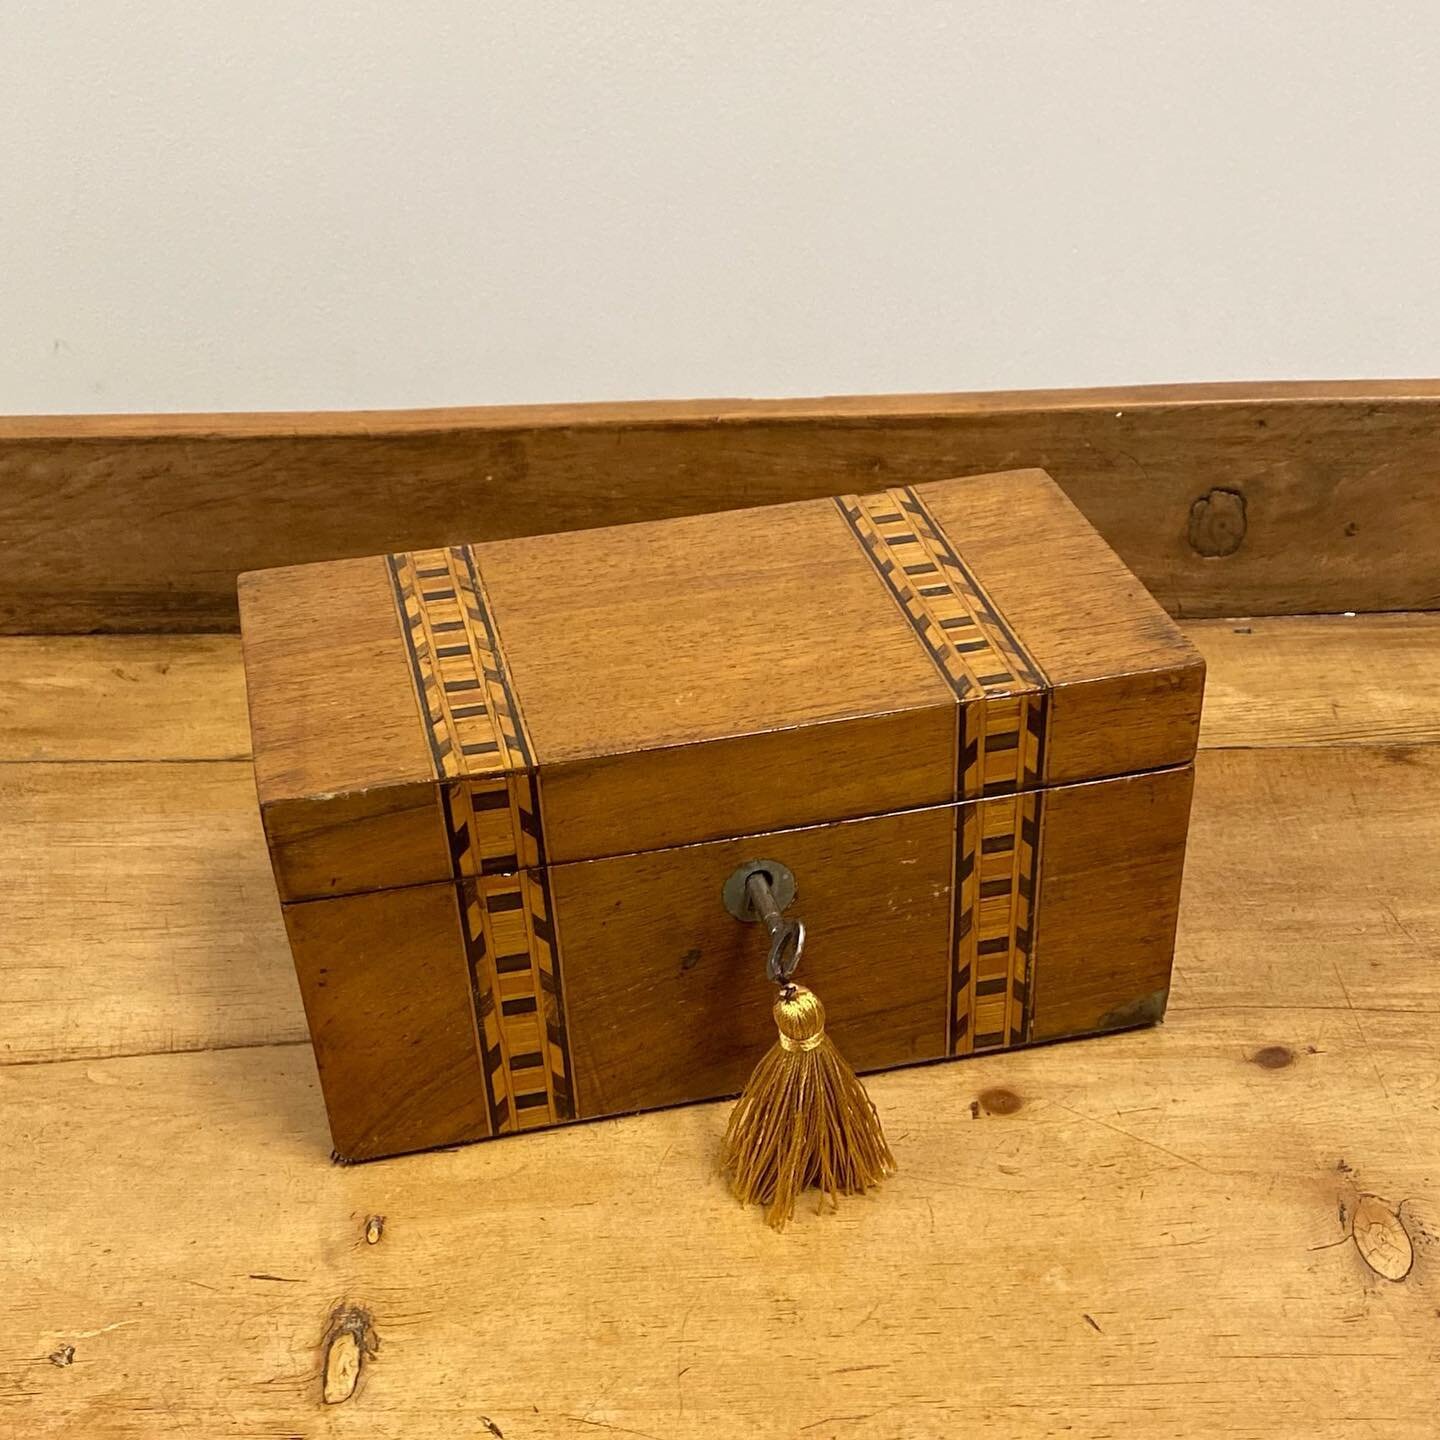 Good Morning&hellip;It&rsquo;s Friday!  Antique Inlaid Wood Box with key from our NEW SHIPMENT.  DM @westendaugusta or Call/Text 706-830-4691 for further info.